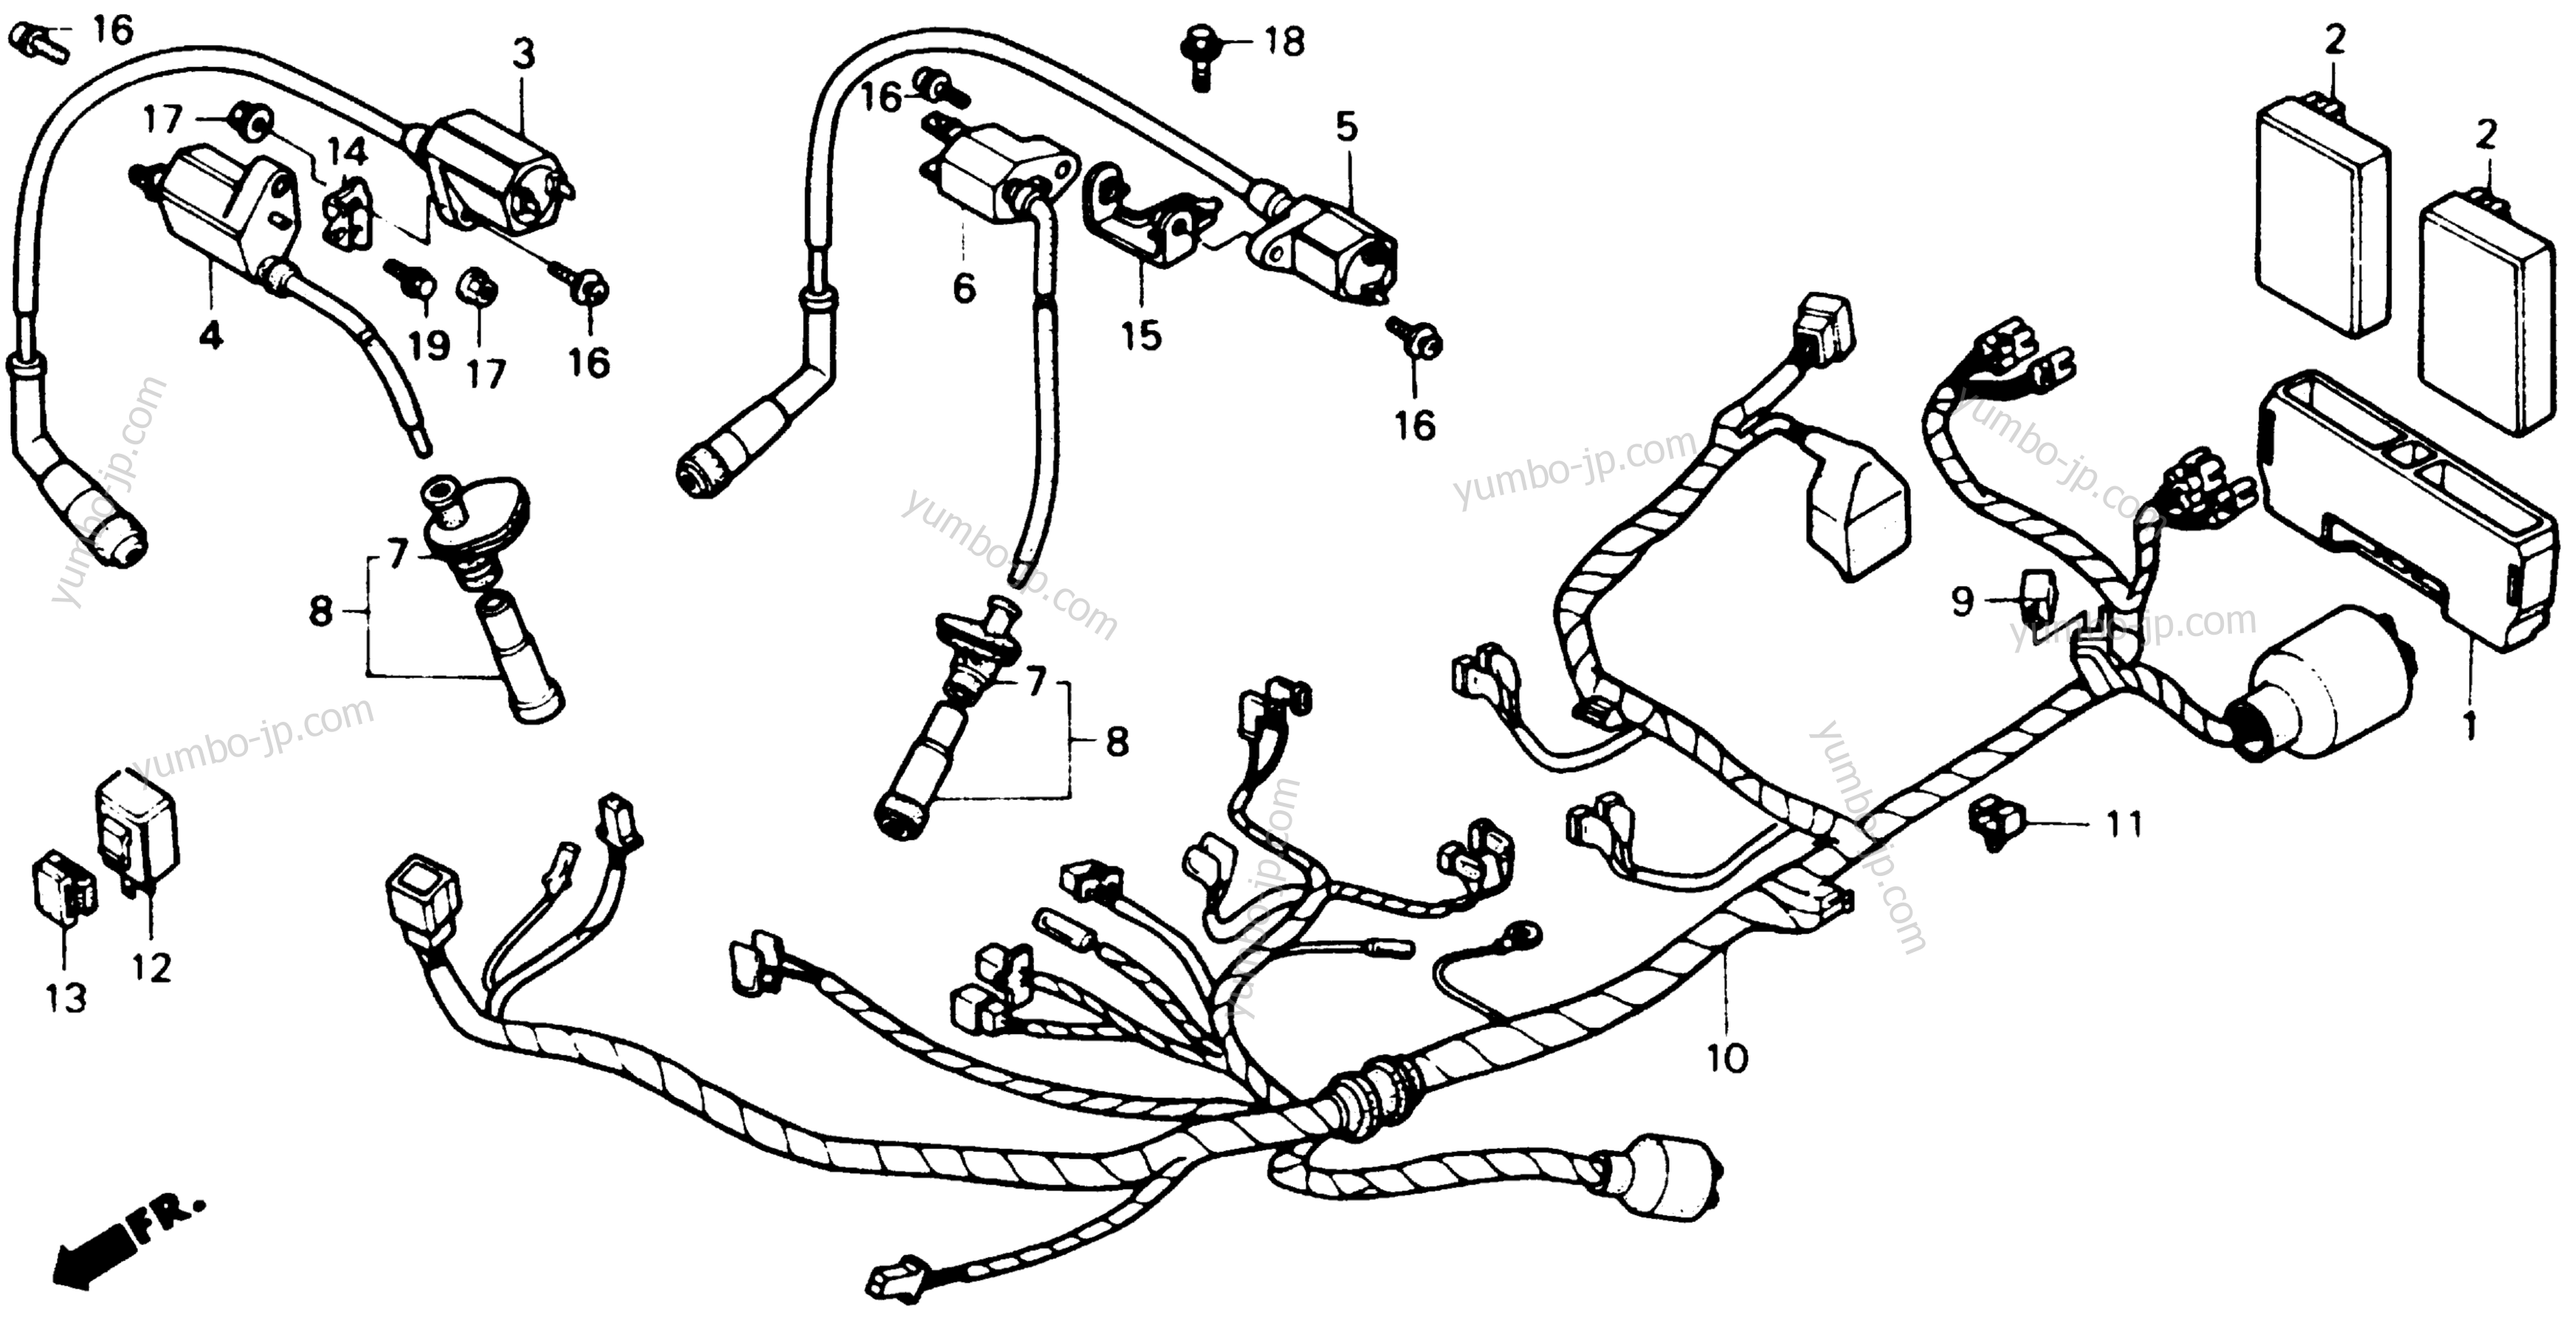 WIRE HARNESS for motorcycles HONDA XL600V AC 1990 year